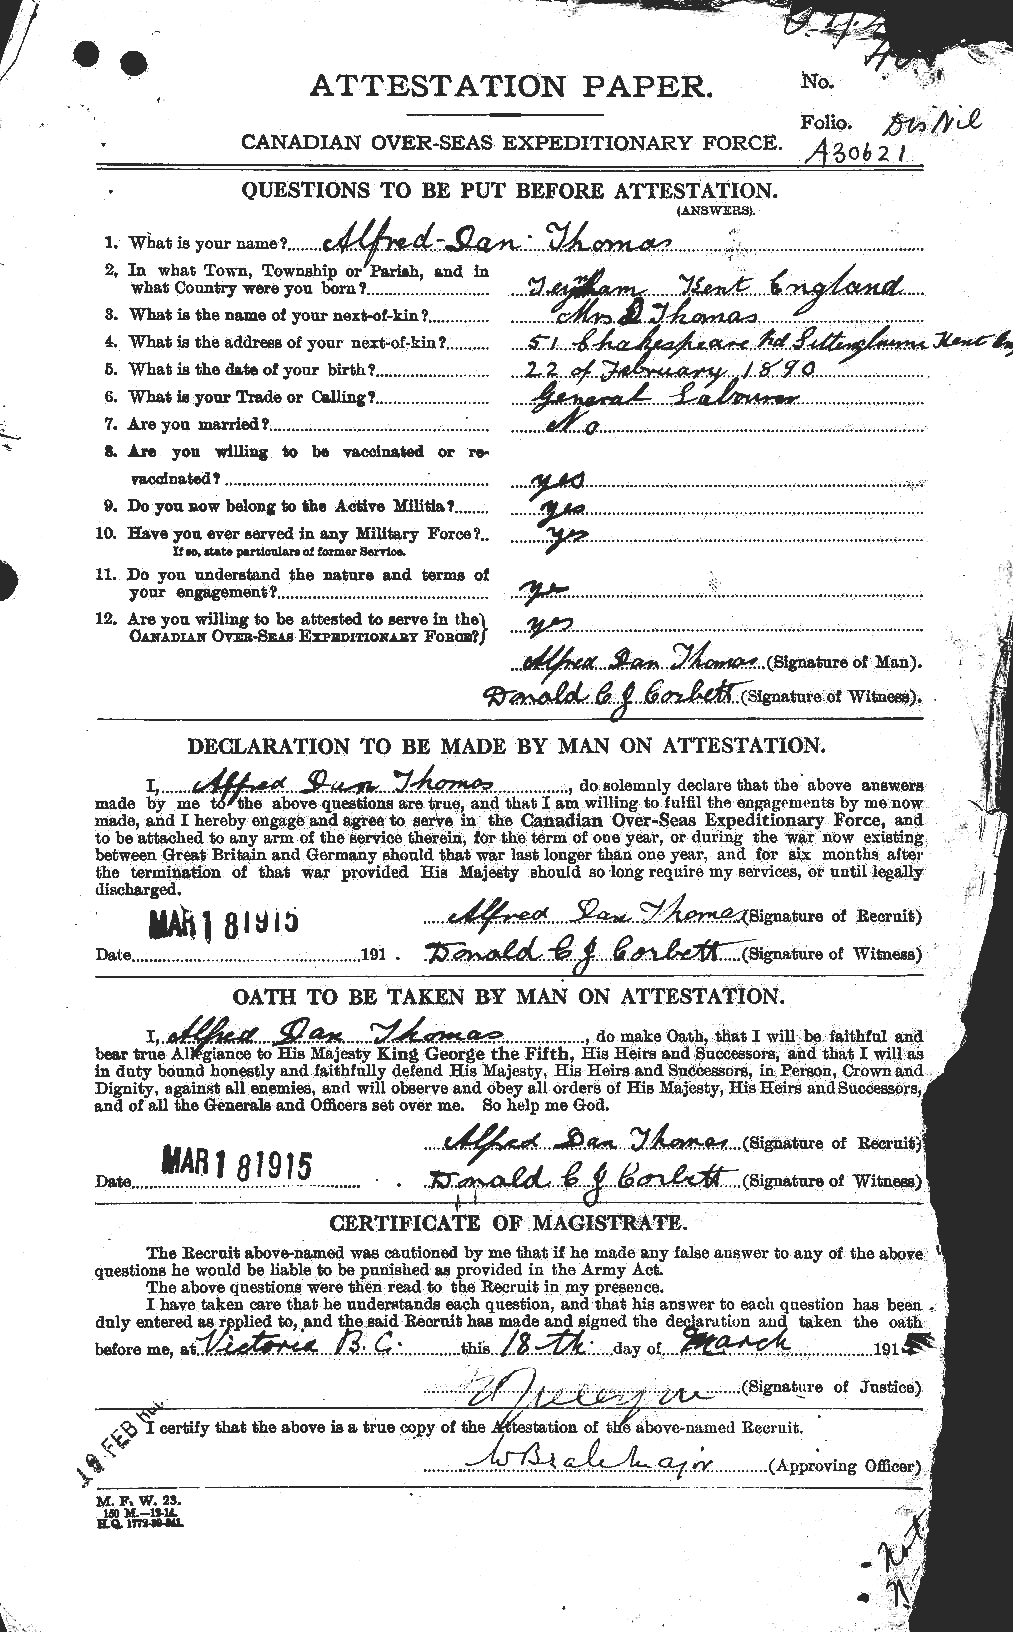 Personnel Records of the First World War - CEF 631315a